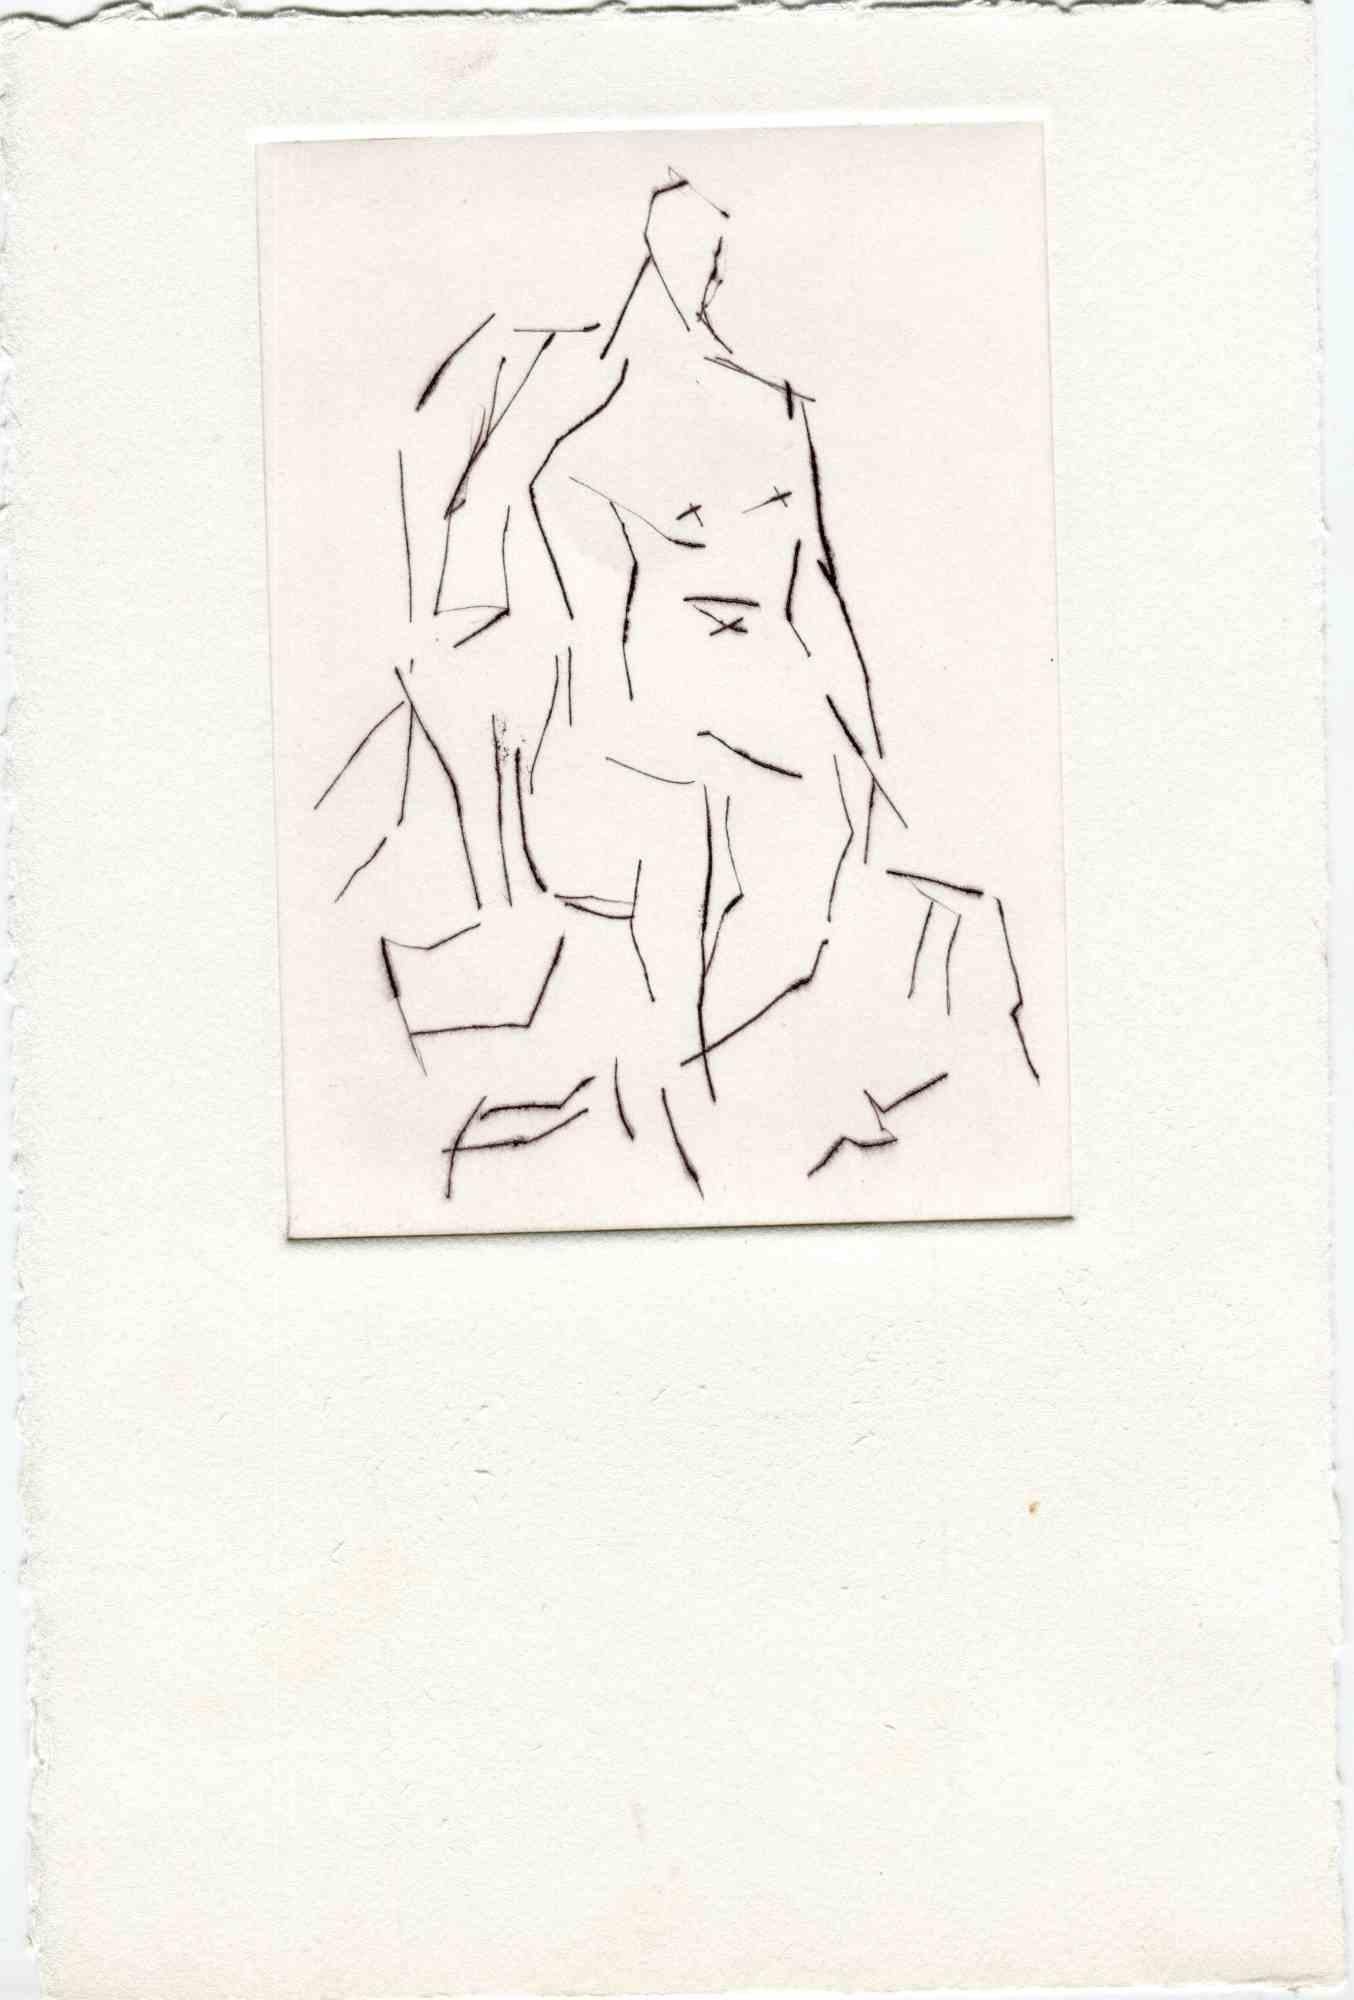 Unknown Figurative Print - Seated Figure - Original Etching and Drypoint - Mid-20th Century